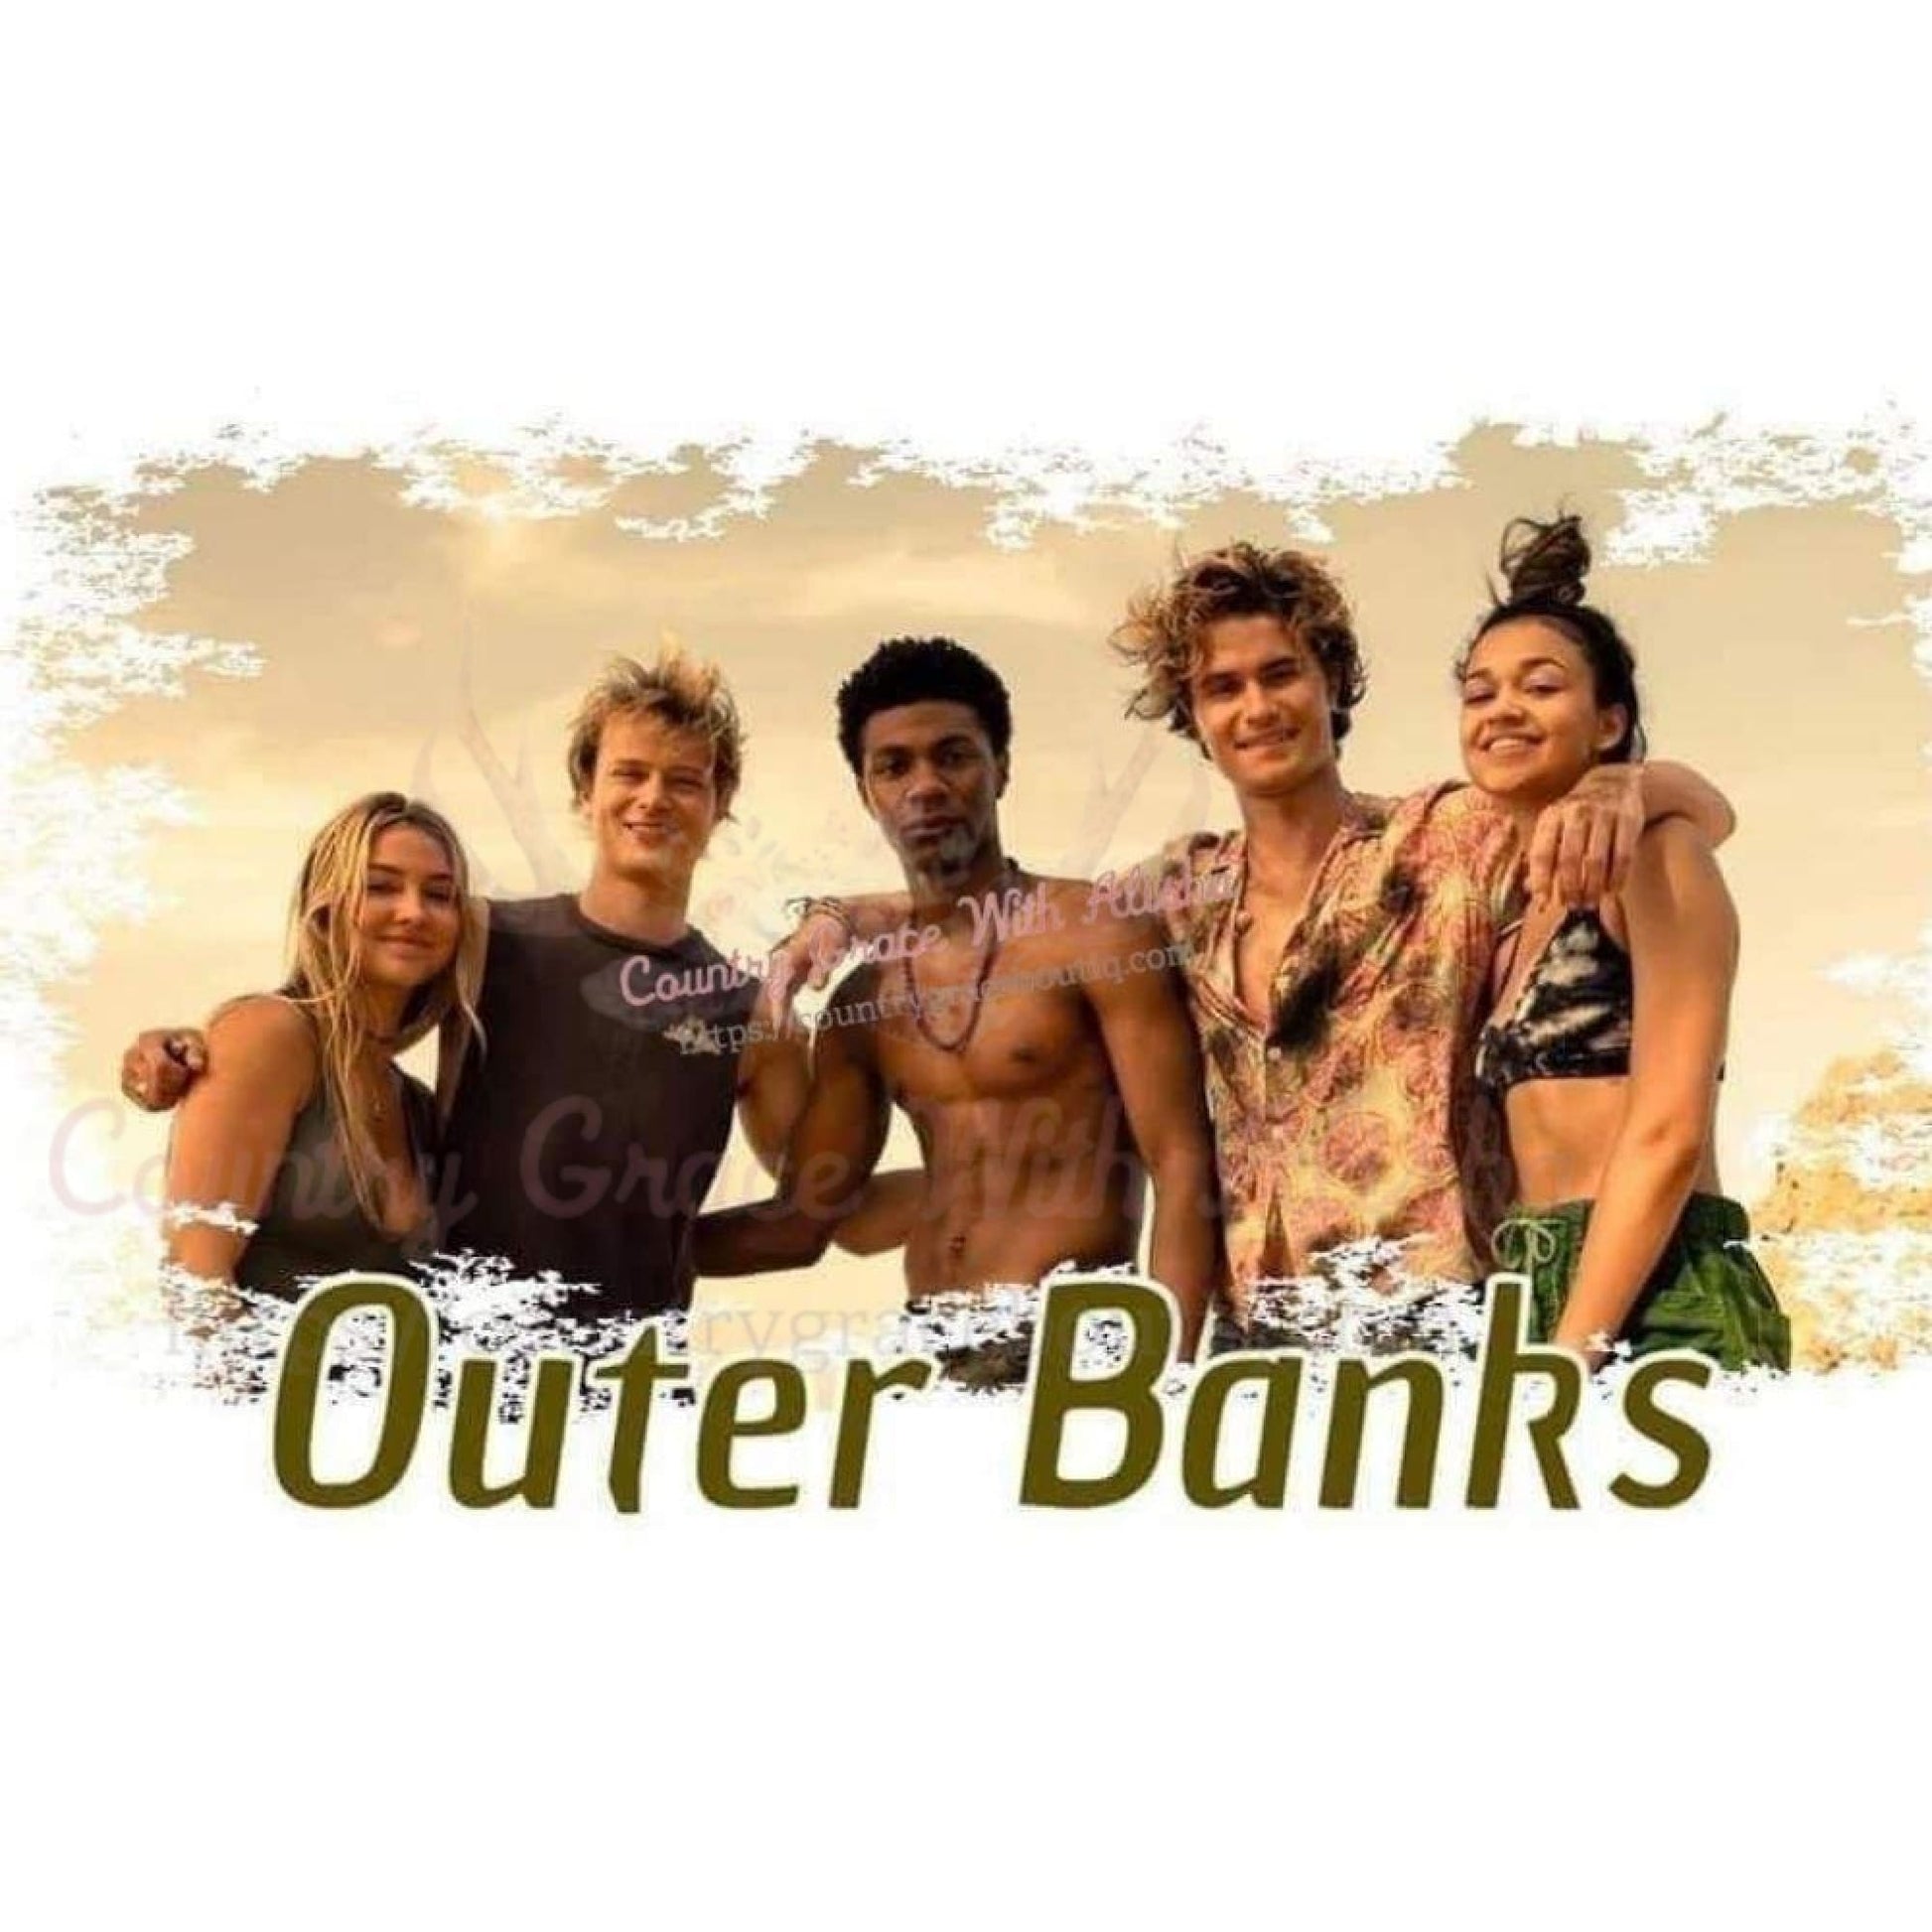 Outer Banks People Sublimation Transfer - Sub $1.50 Country 